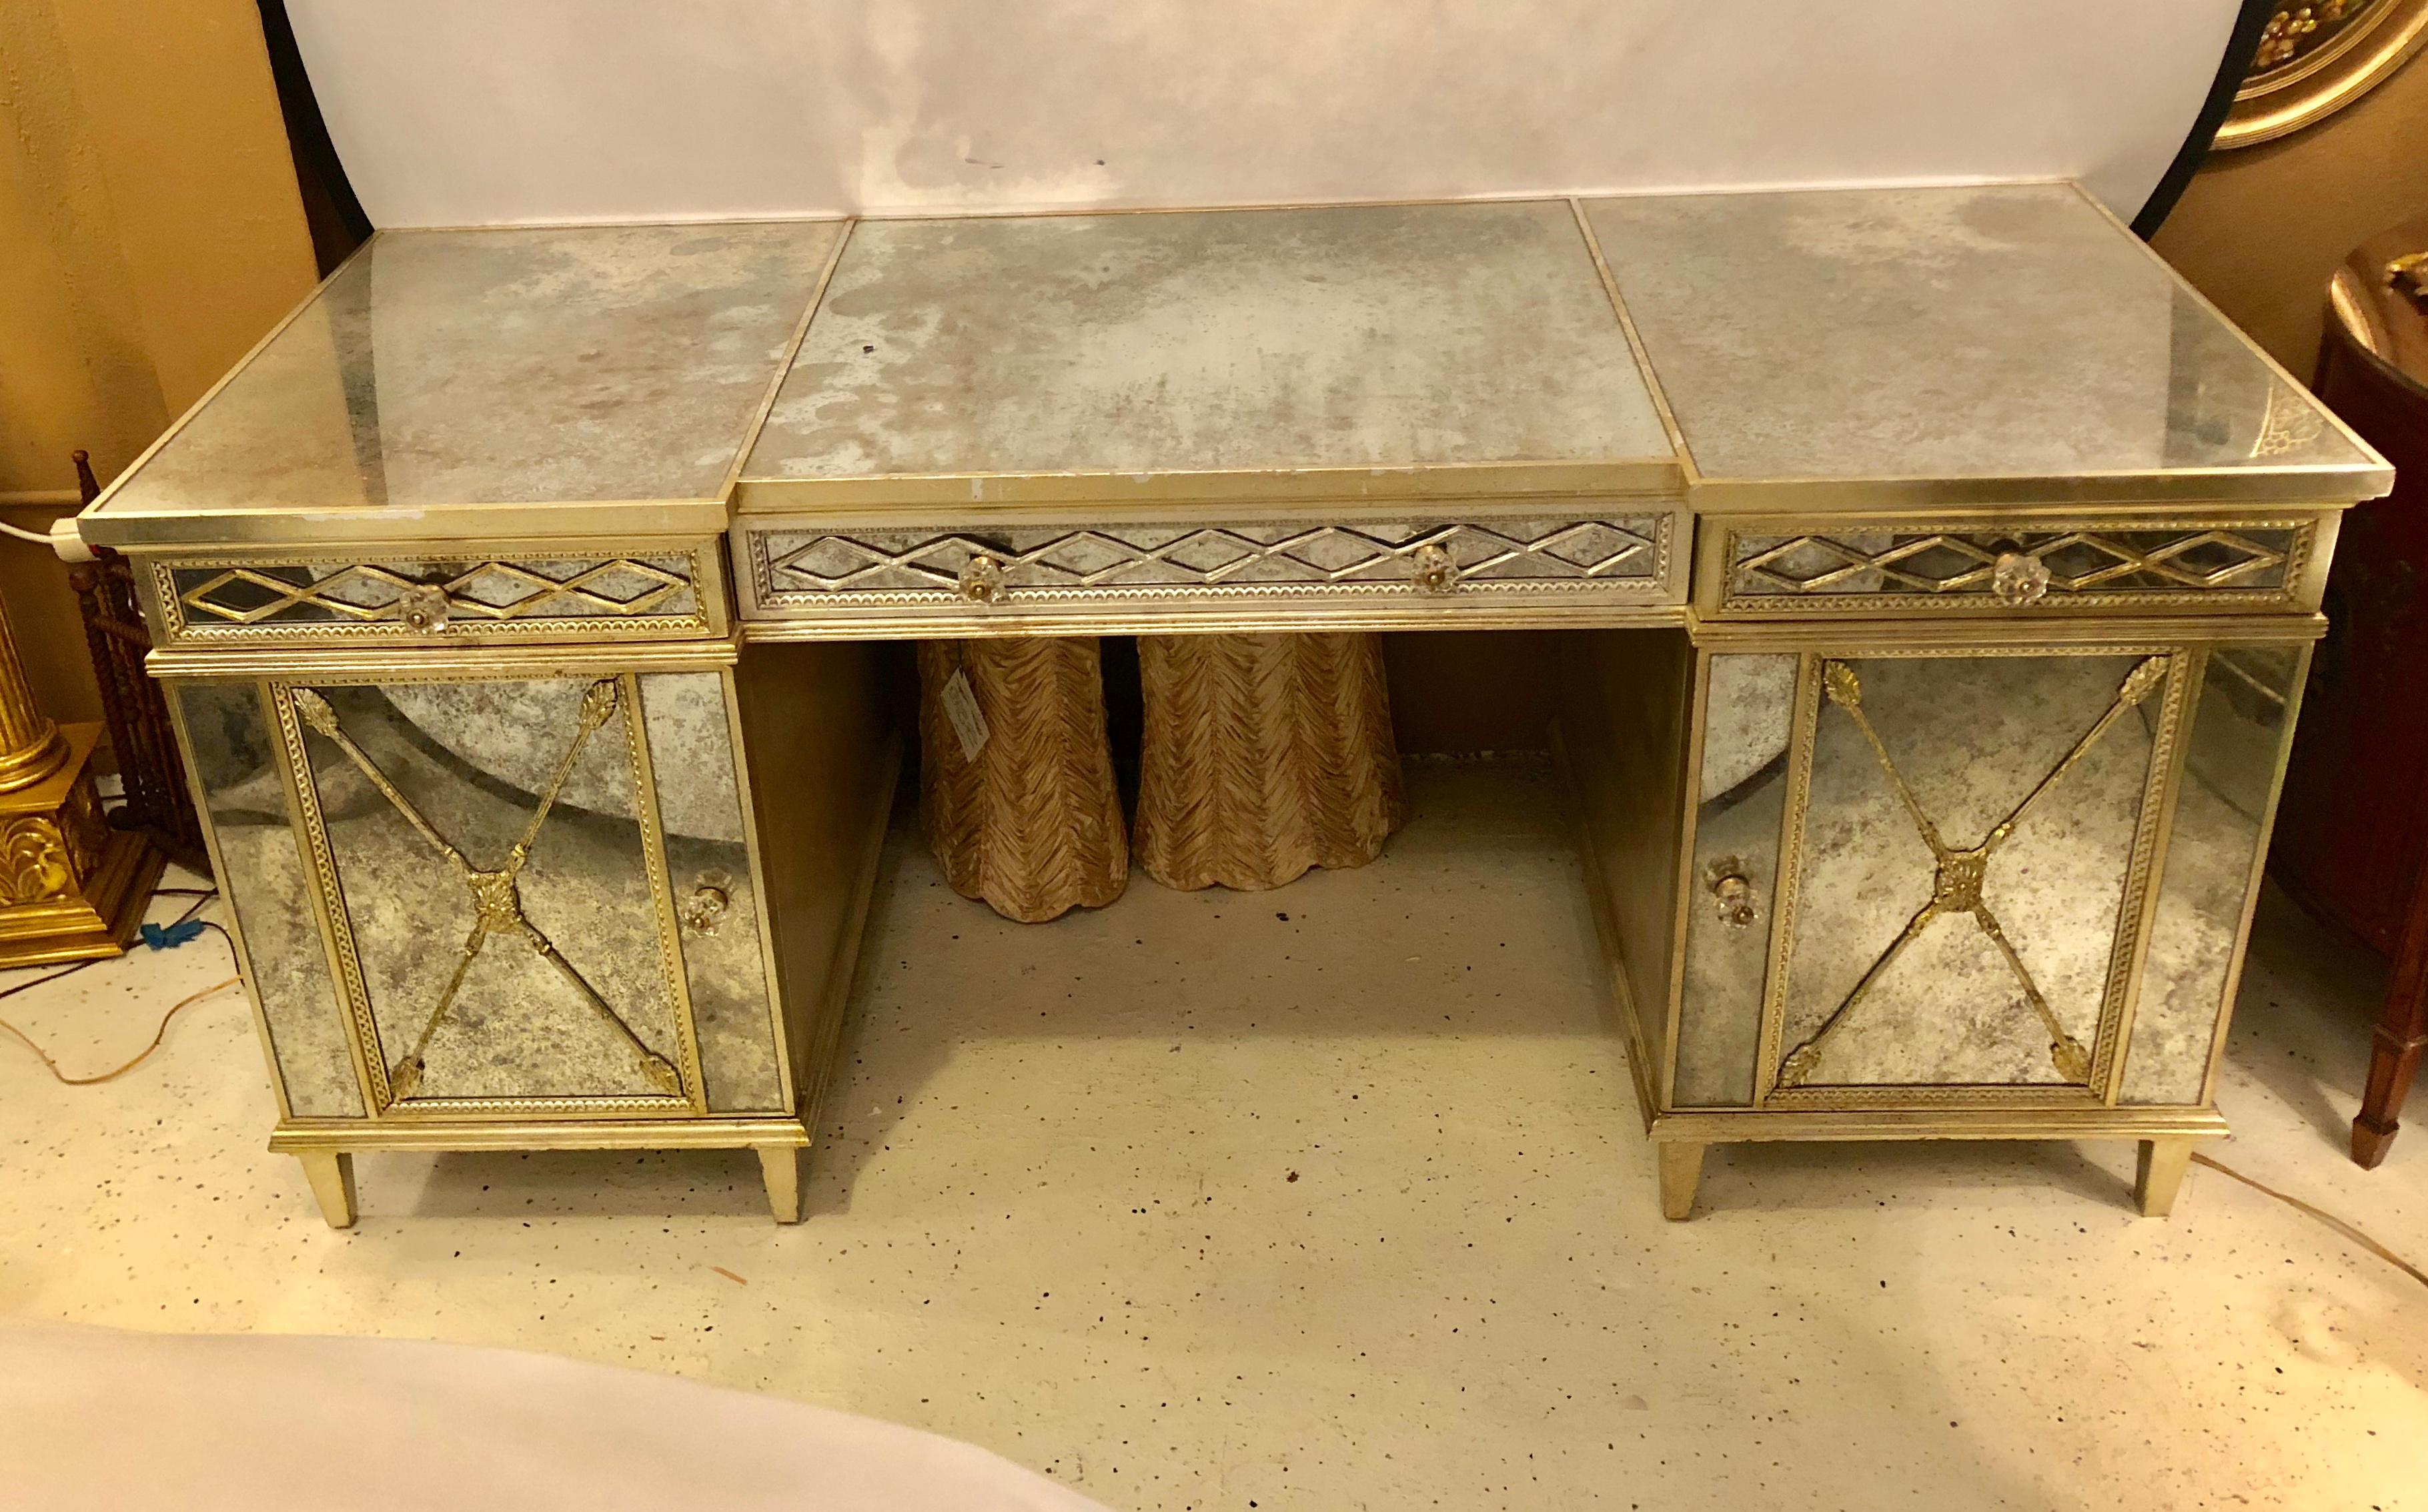 Hollywood Regency Silver Gilt Triple Vanity with Antique Mirror Panelling and Closed Arrow Design